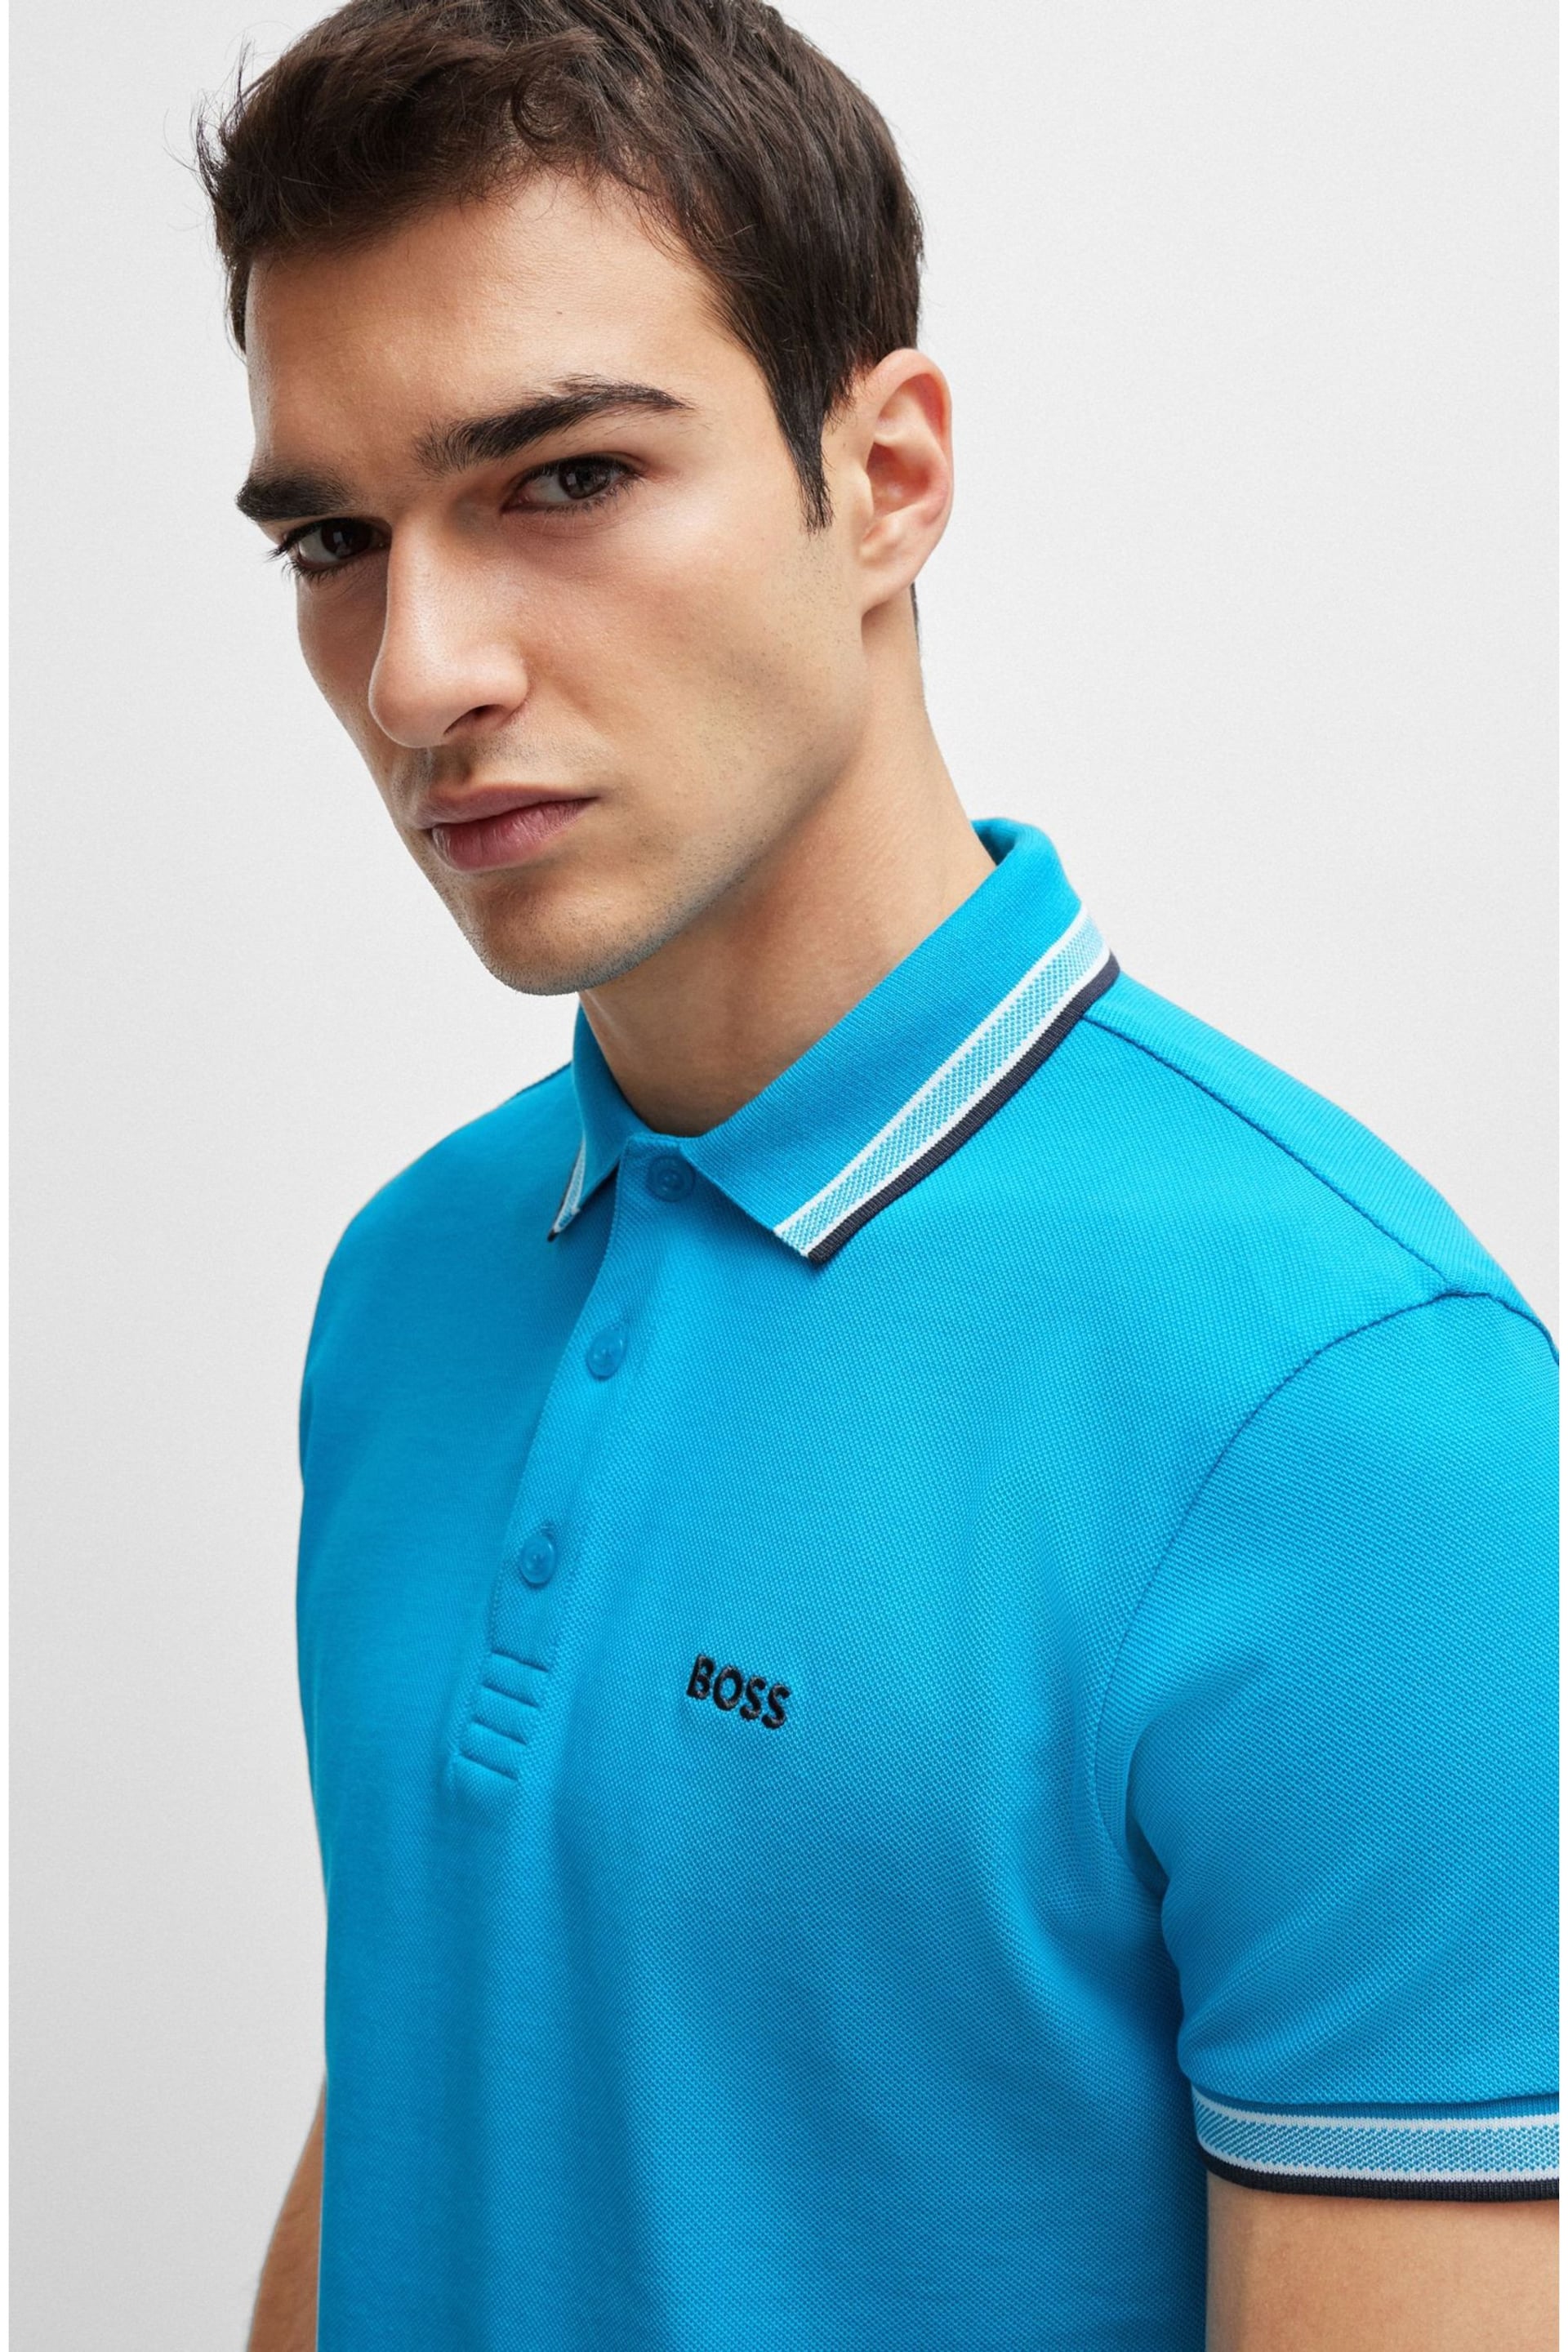 BOSS Blue Chrome Cotton Polo Shirt With Contrast Logo Details - Image 4 of 5